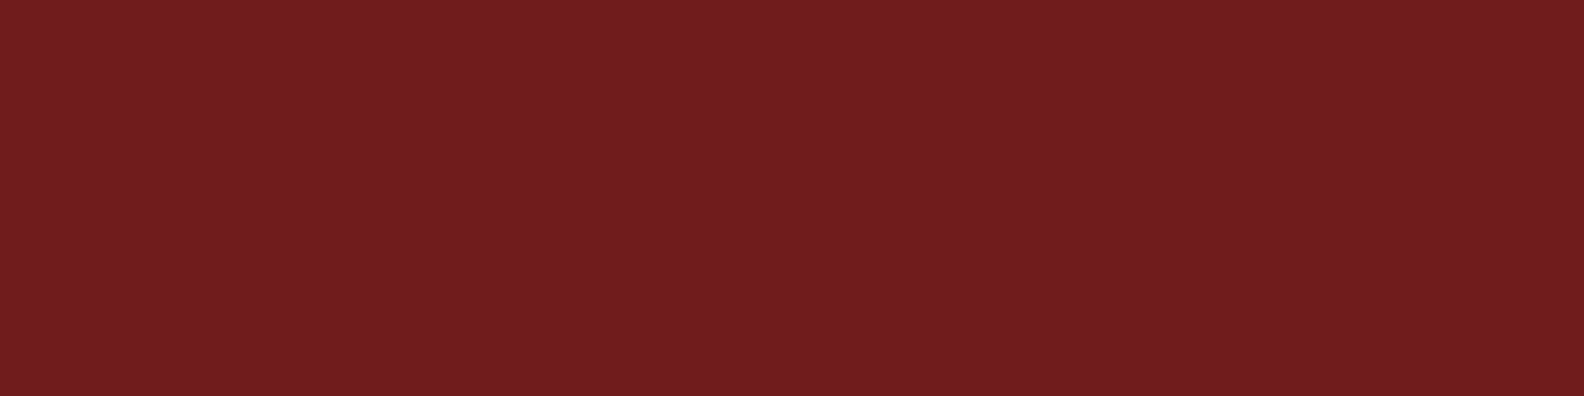 1584x396 Prune Solid Color Background